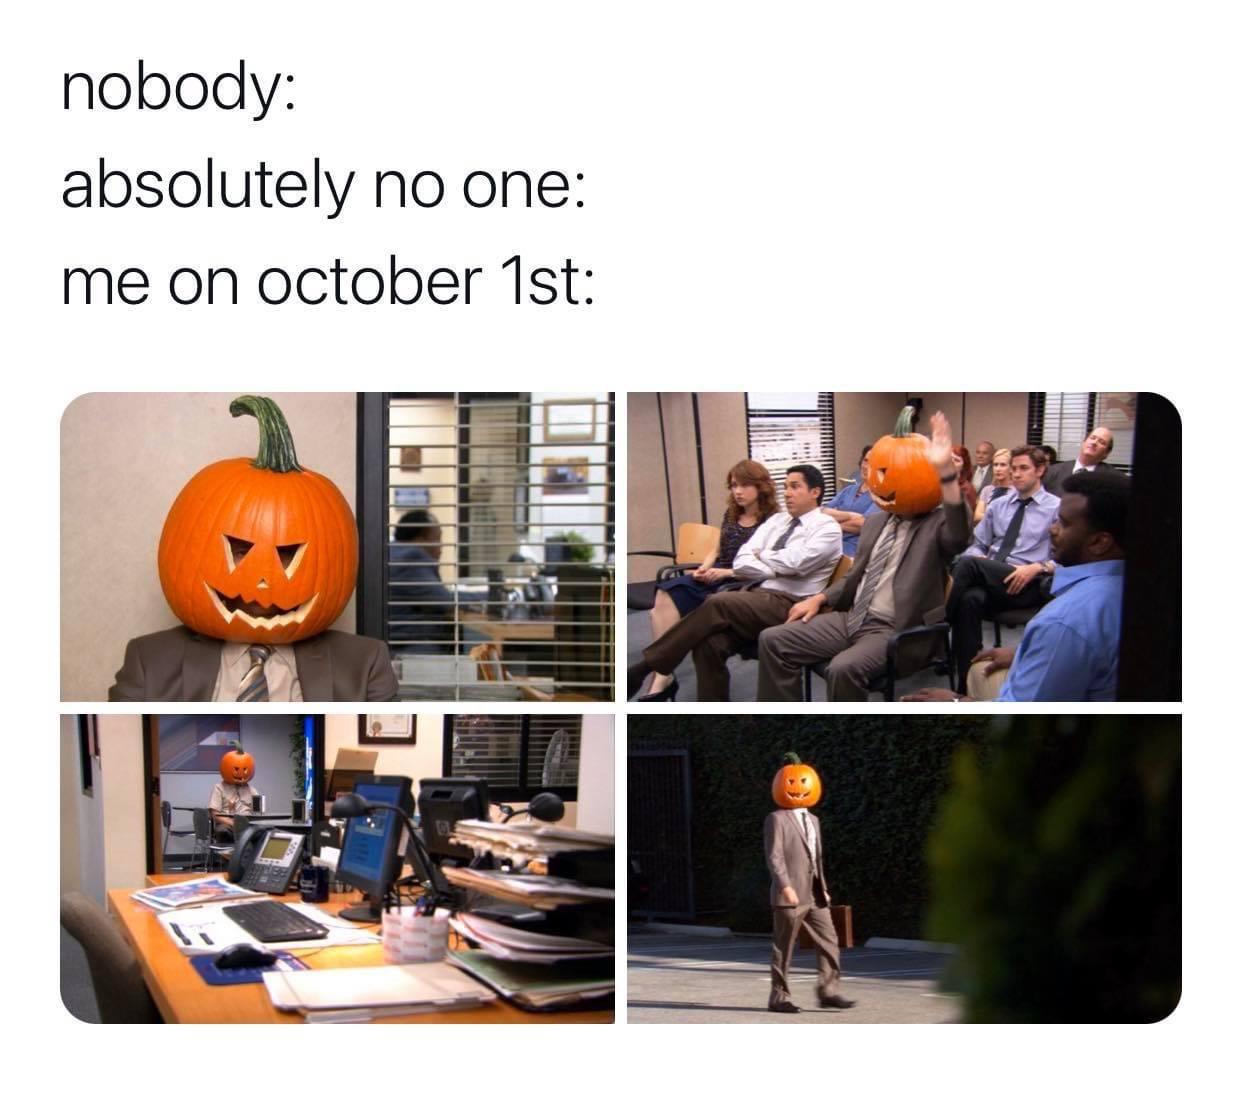 The Office memes - media - nobody absolutely no one me on october 1st